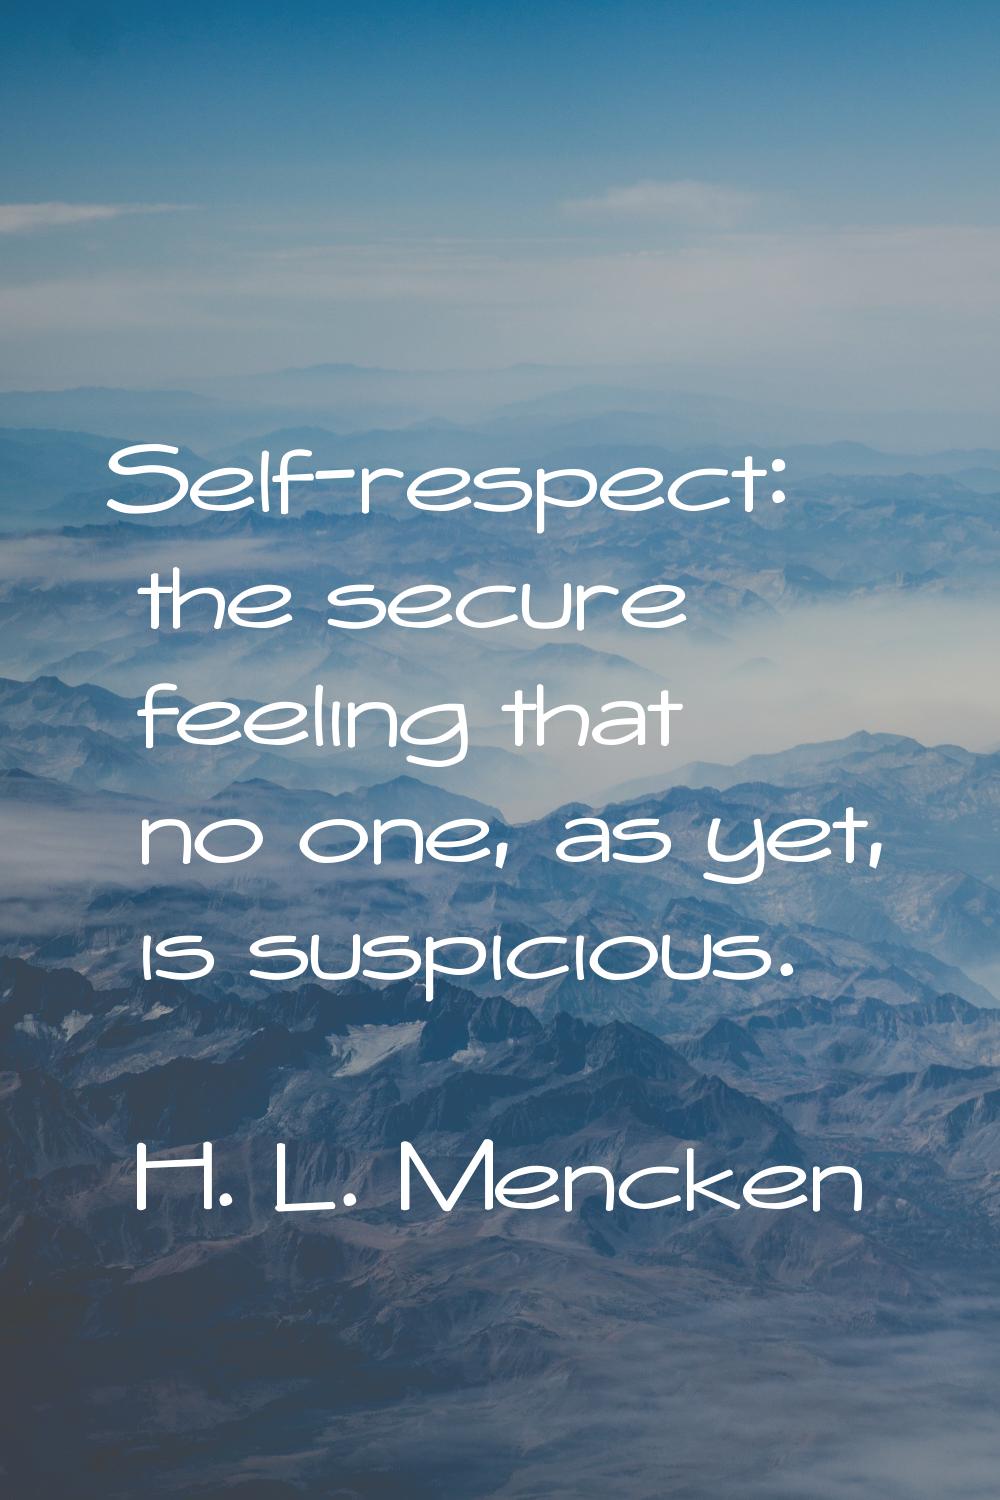 Self-respect: the secure feeling that no one, as yet, is suspicious.